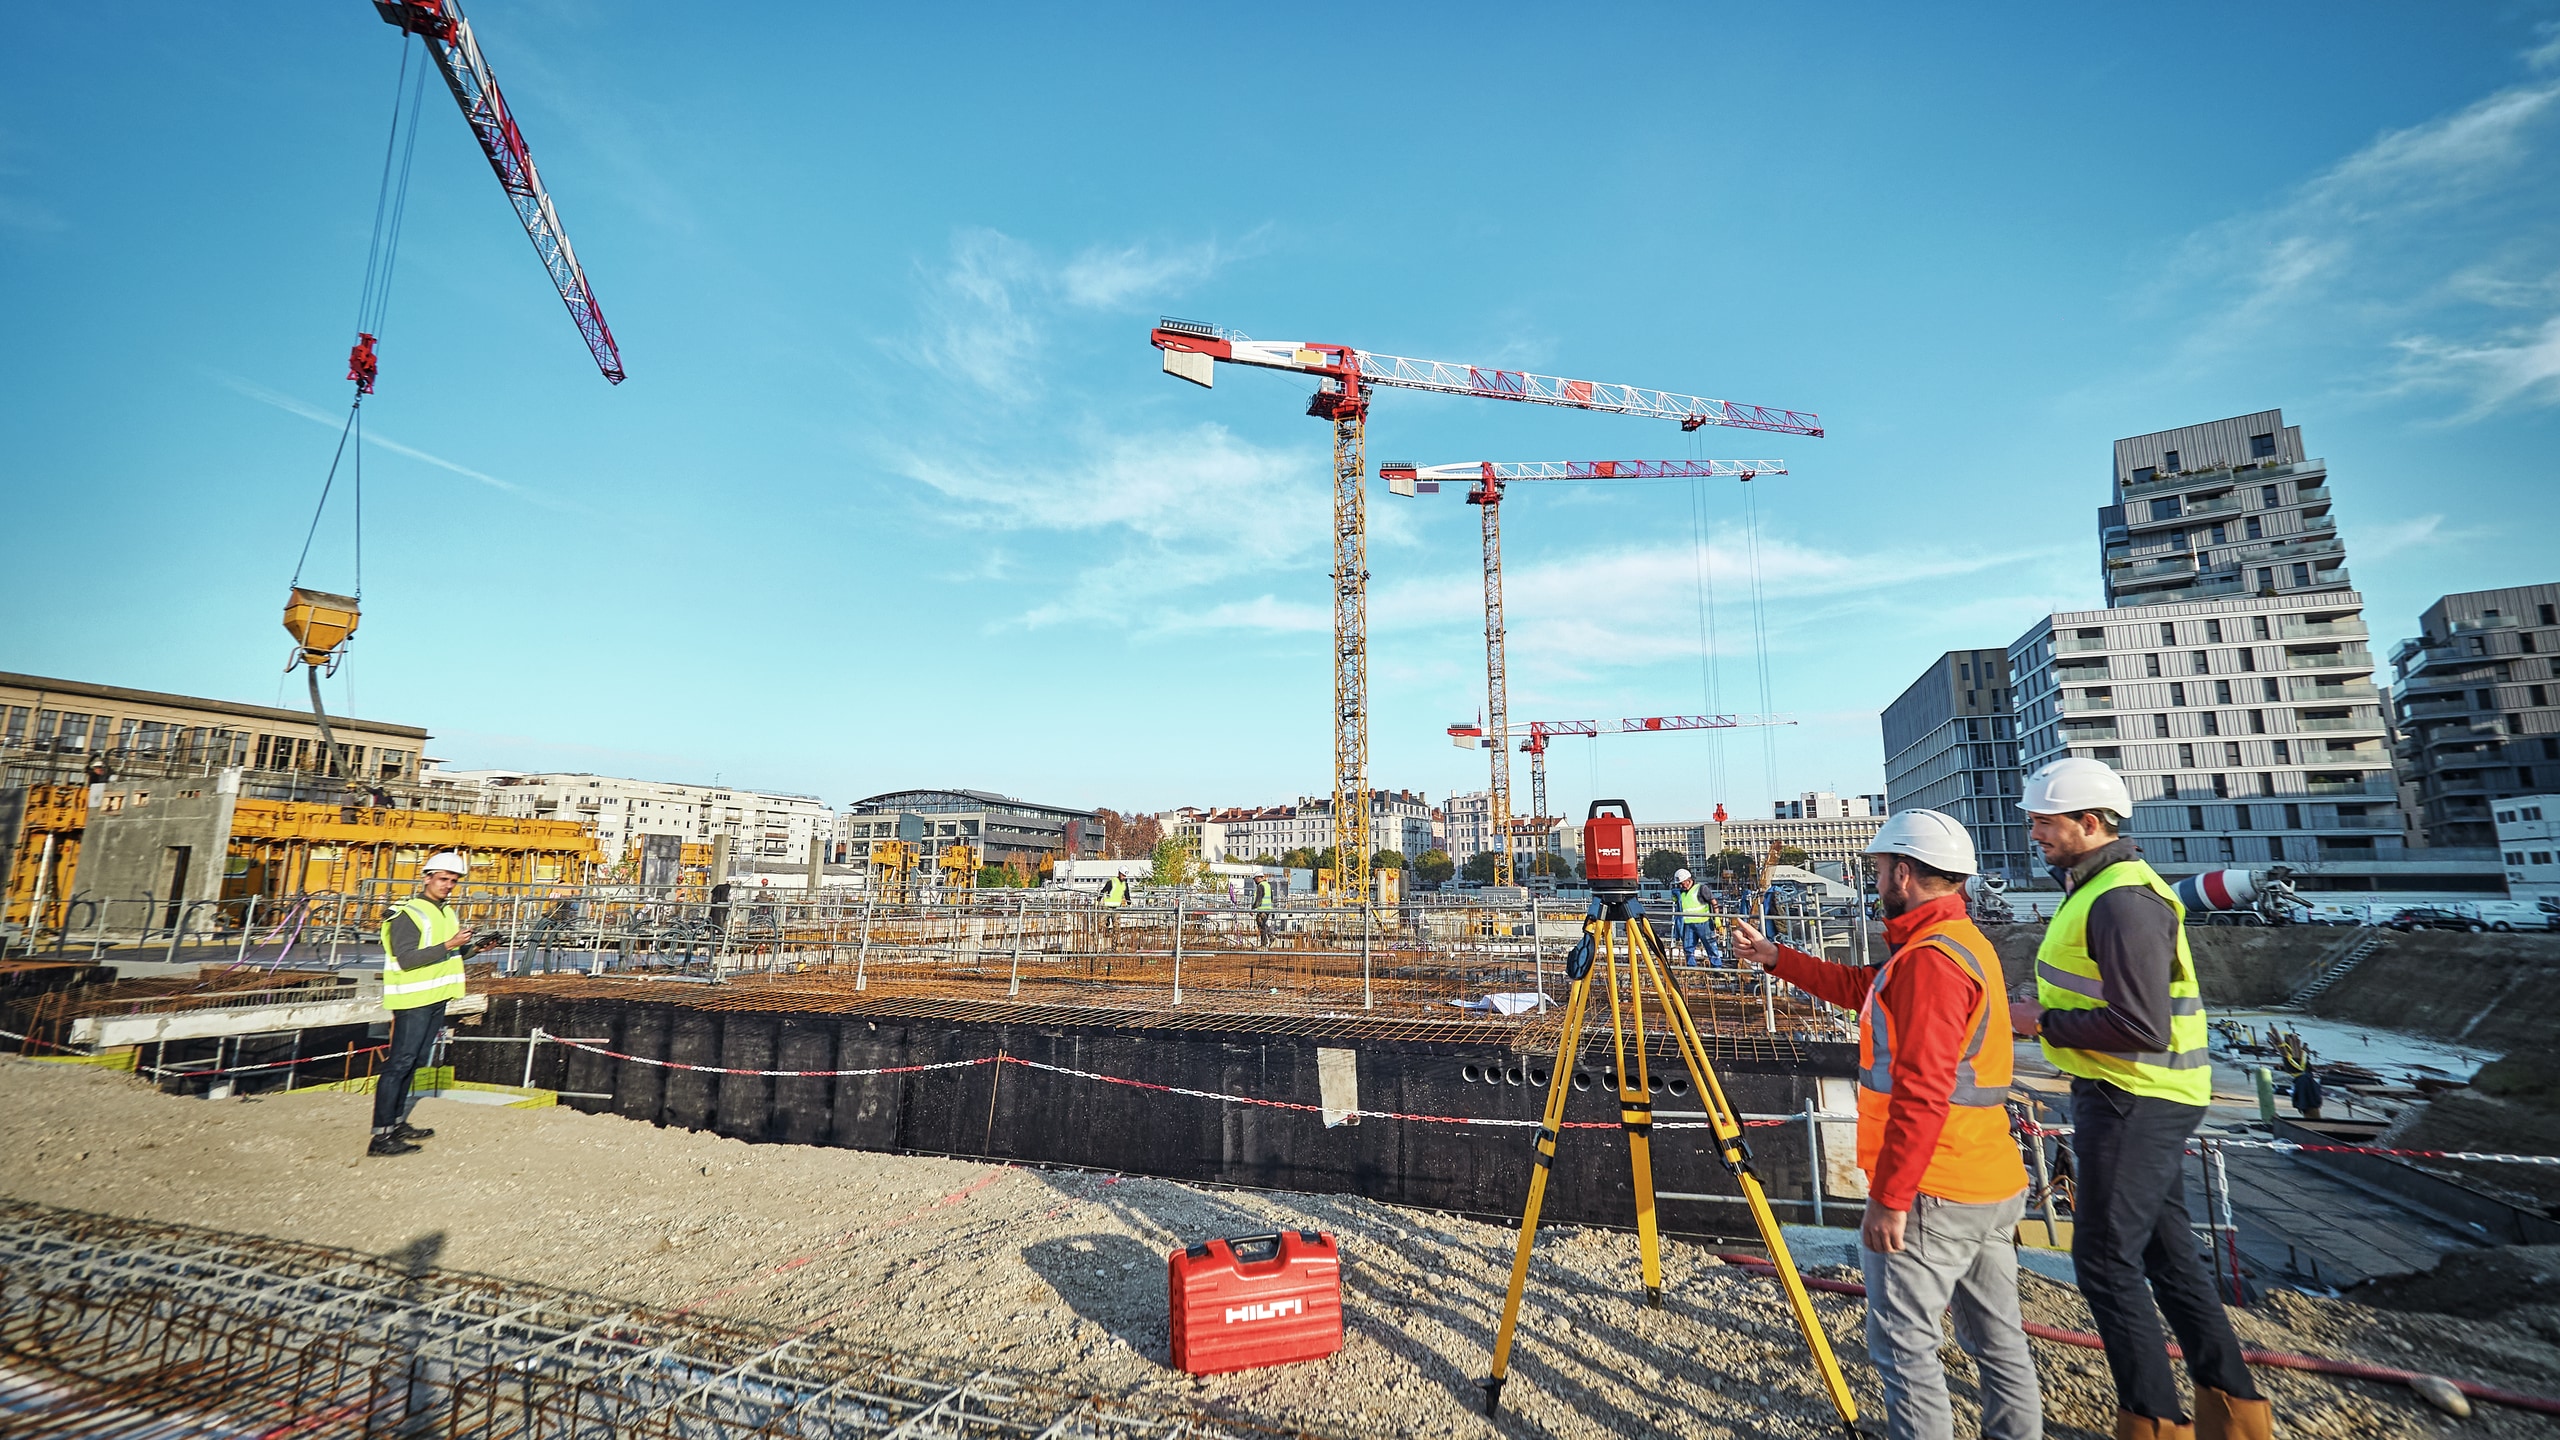 Two men stood infront of a tripod on a construction site with cranes in the background